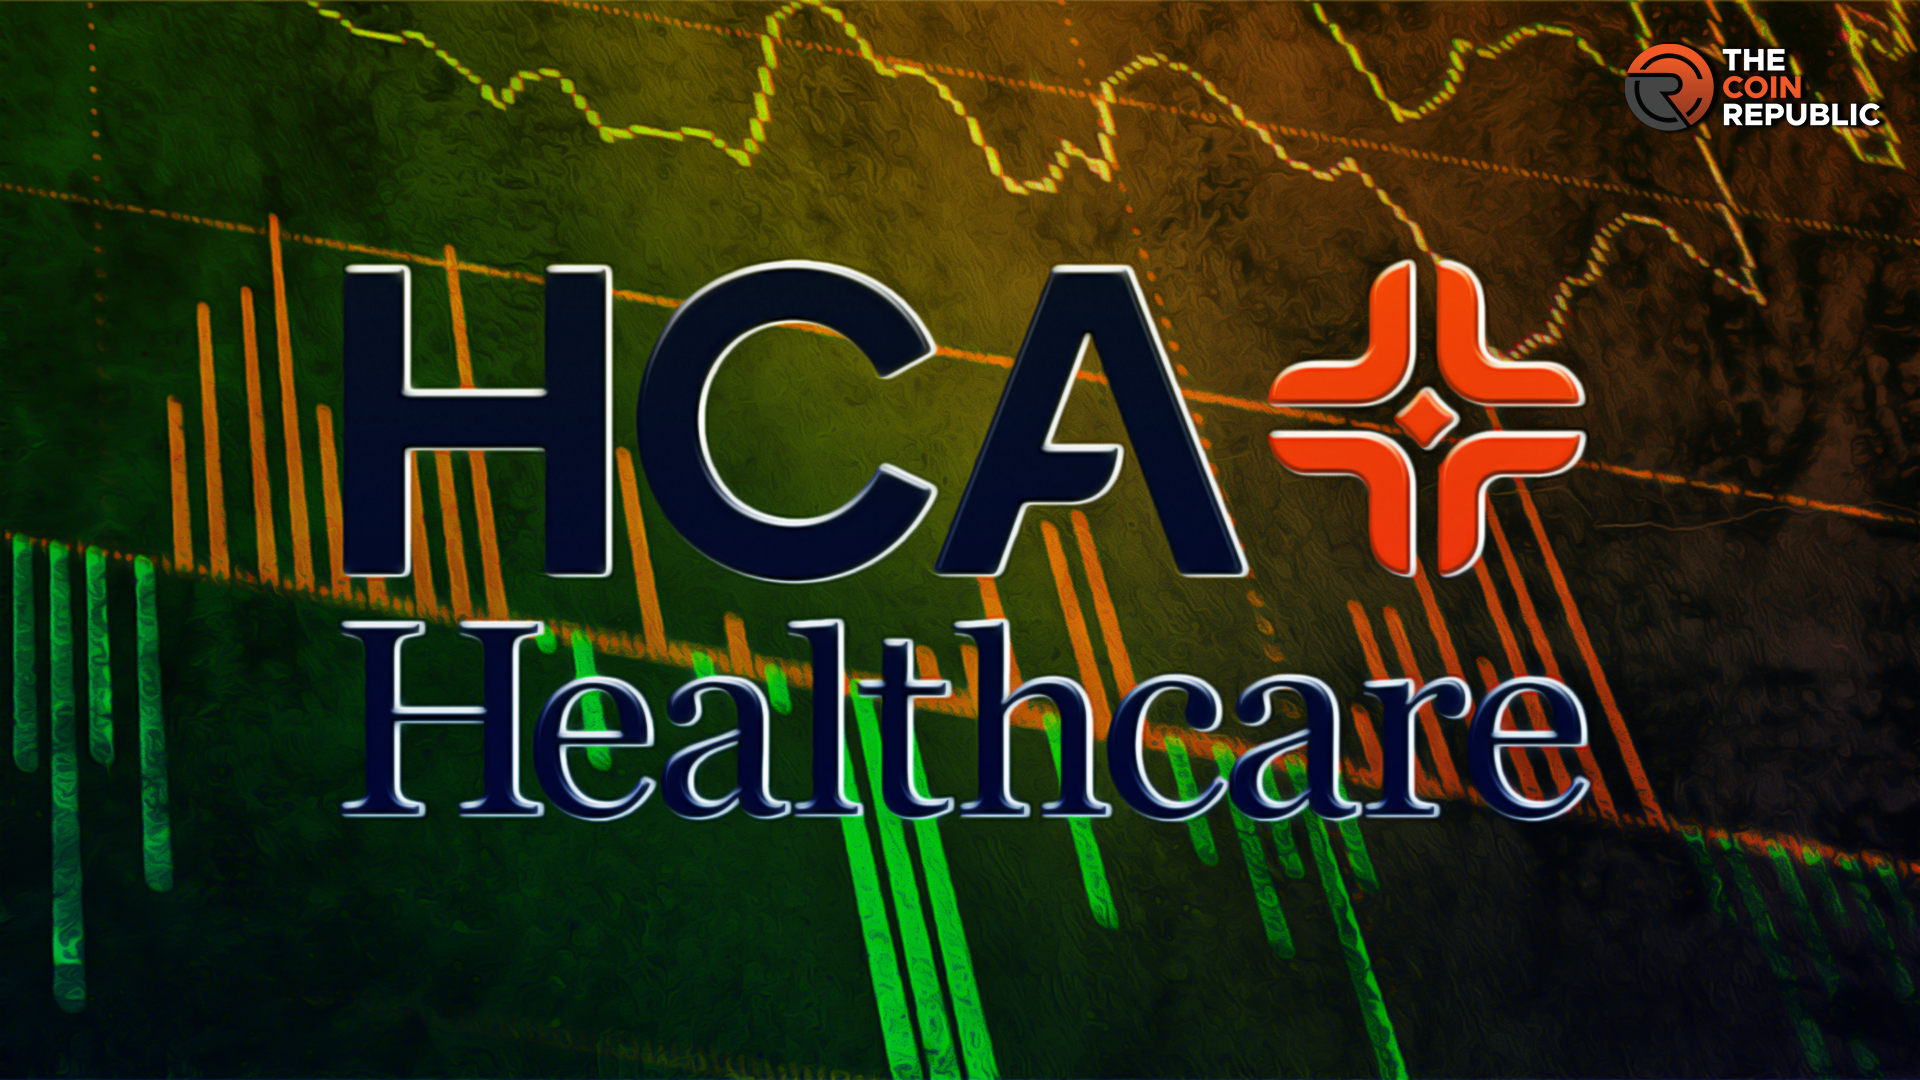 HCA Stock Price Paused Near $225, Will it Bounce off or Plummet?